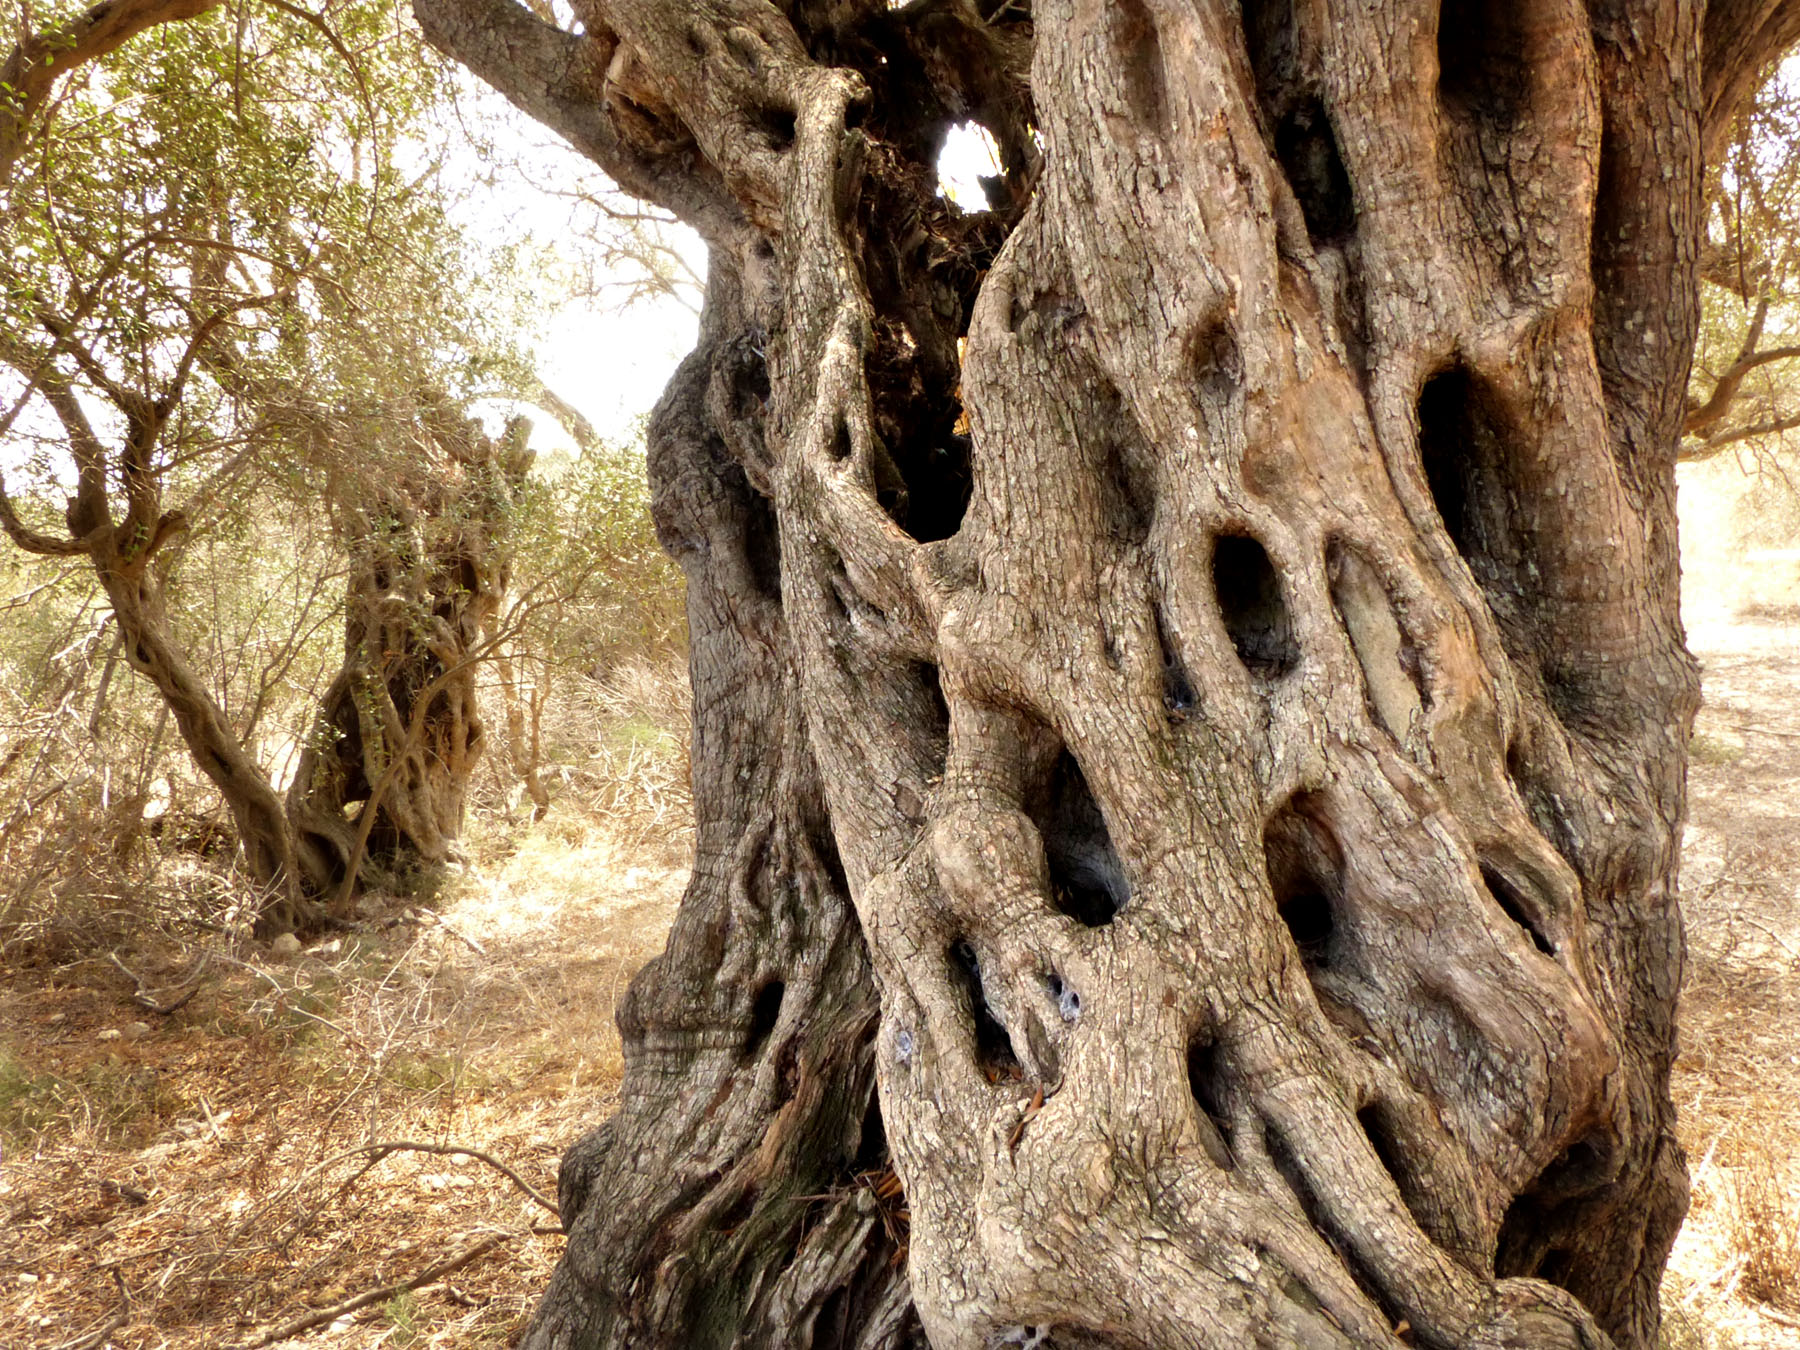 Believed to be the oldest in Malta, these bidni olive trees stand among some 20 that have been here since at least Roman times. The Maltese government has designated them as national monuments.